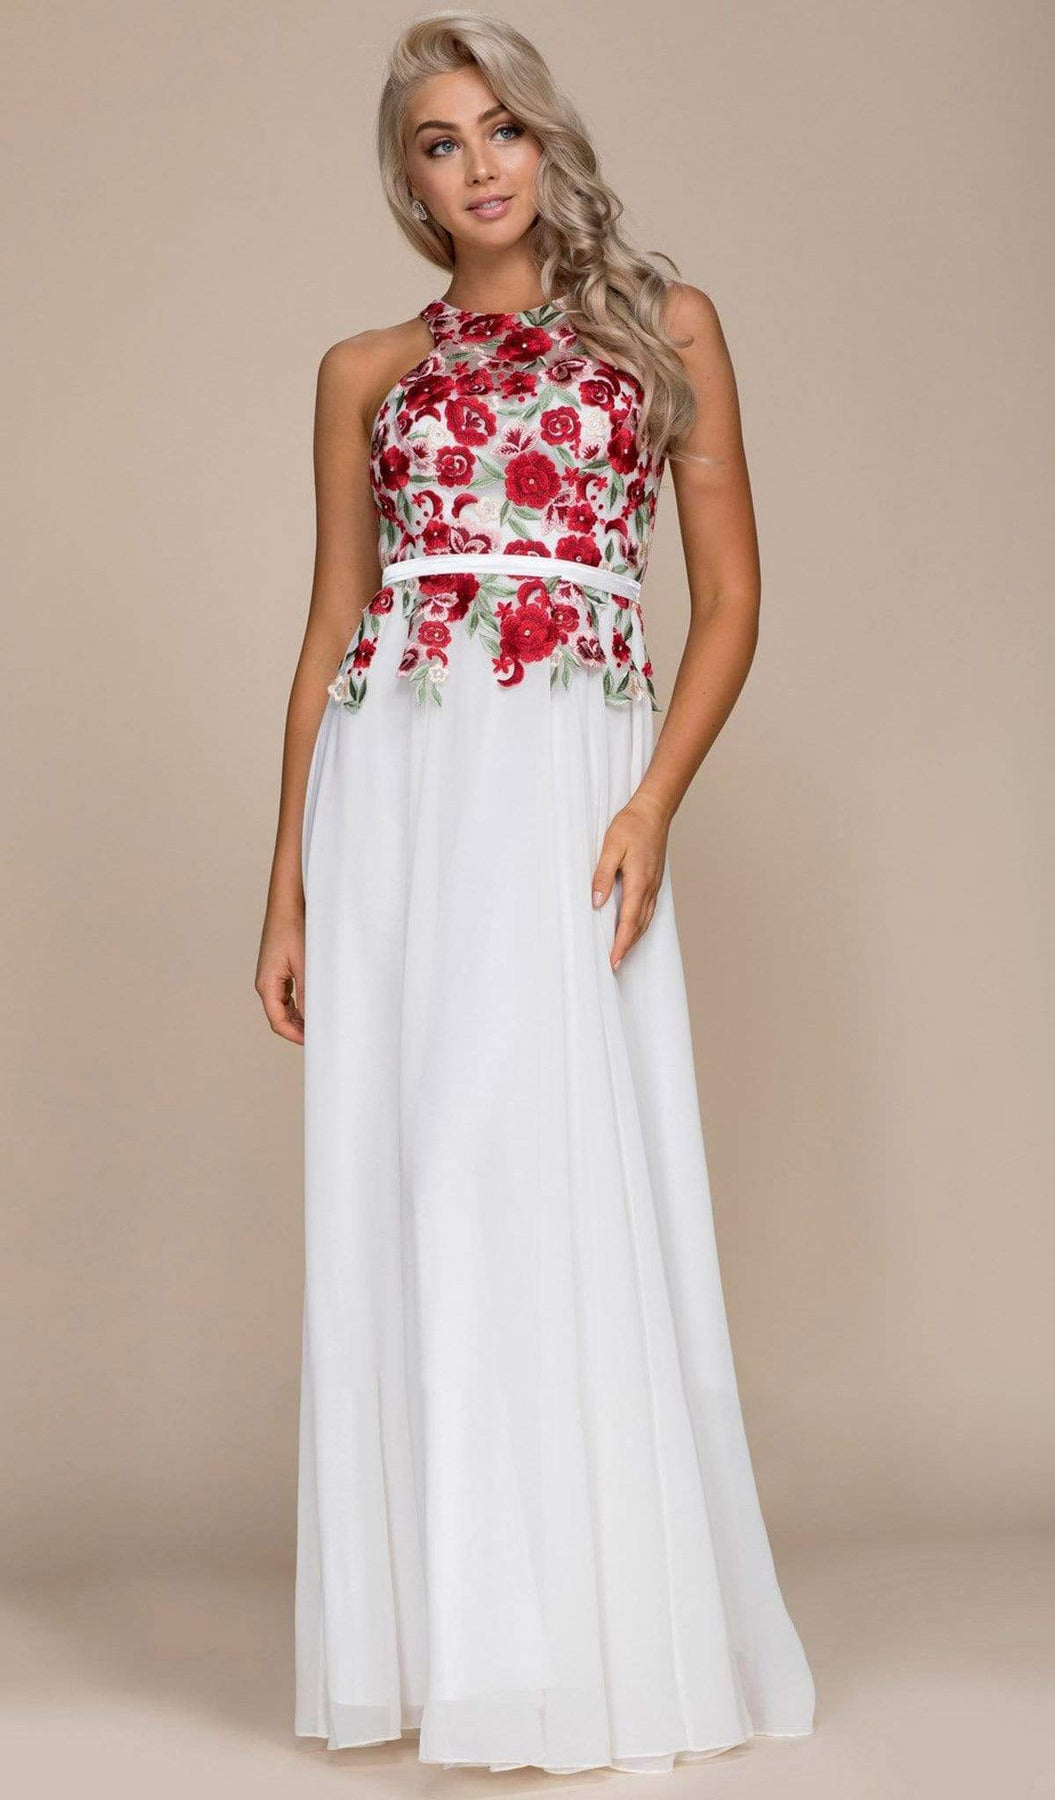 Nox Anabel - 8275 Floral Embroidered A-line Dress Special Occasion Dress XS / Ivory